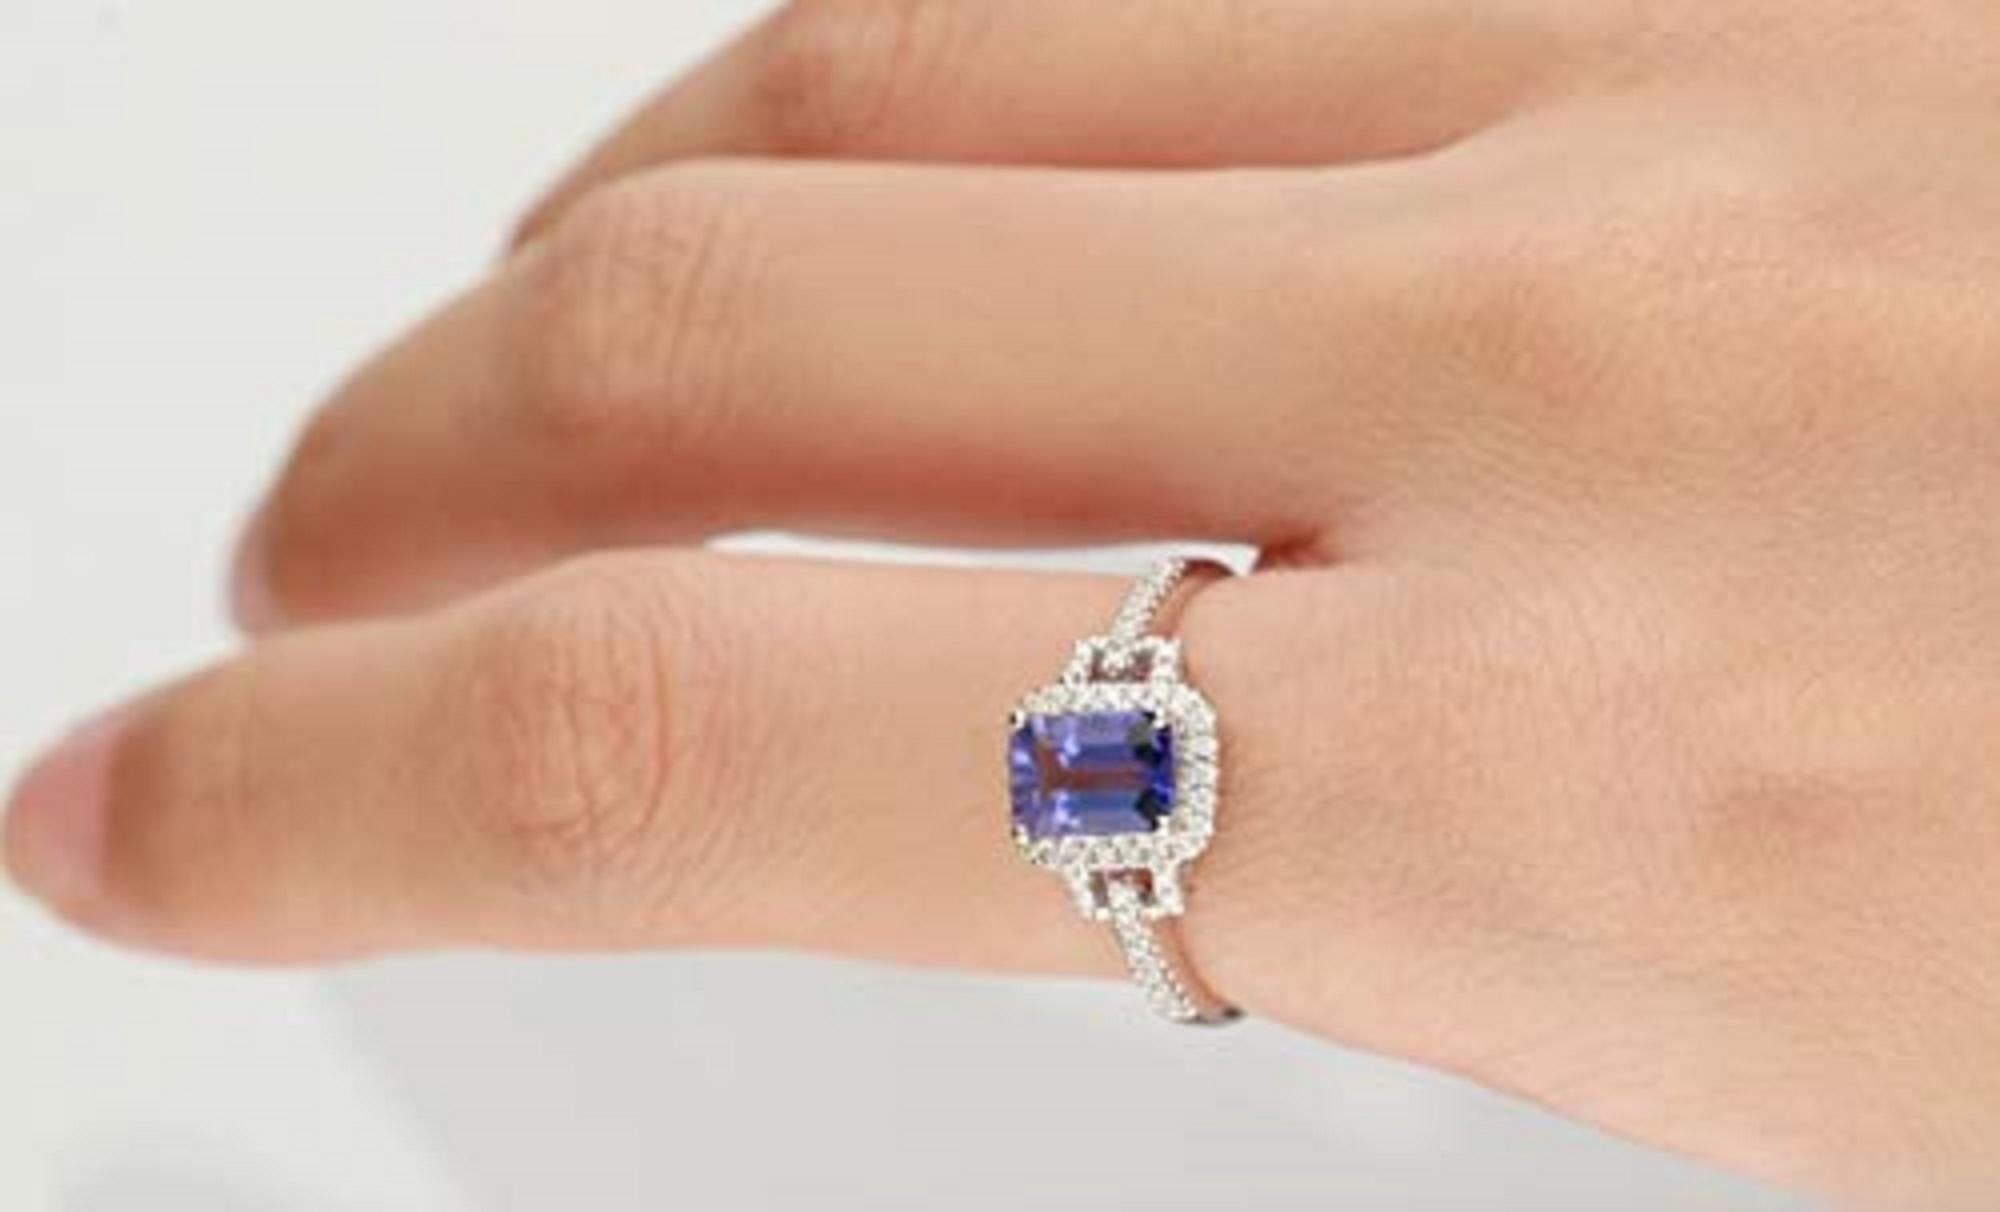 Stunning, timeless and classy eternity Unique Ring. Decorate yourself in luxury with this Gin & Grace Ring. The 14k White Gold jewelry boasts Emerald-Cut Prong Setting Genuine Tanzanite (1 pcs) 1.13 Carat, along with Natural Round cut white Diamond